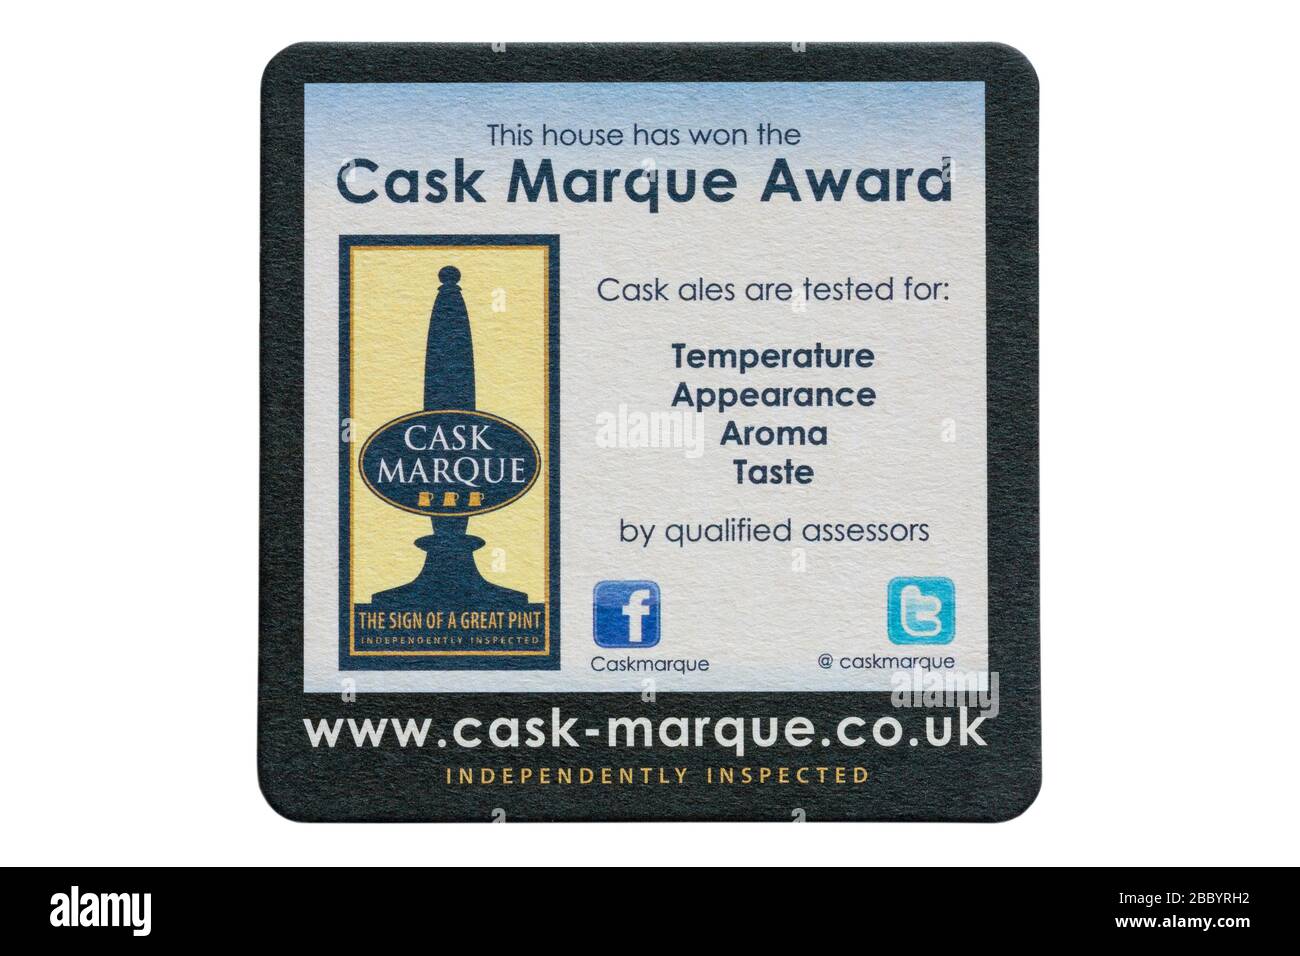 This house has won the Cask Marque Award cask ales are tested for temperature appearance aroma taste by qualified assessors beer mat coaster on white Stock Photo